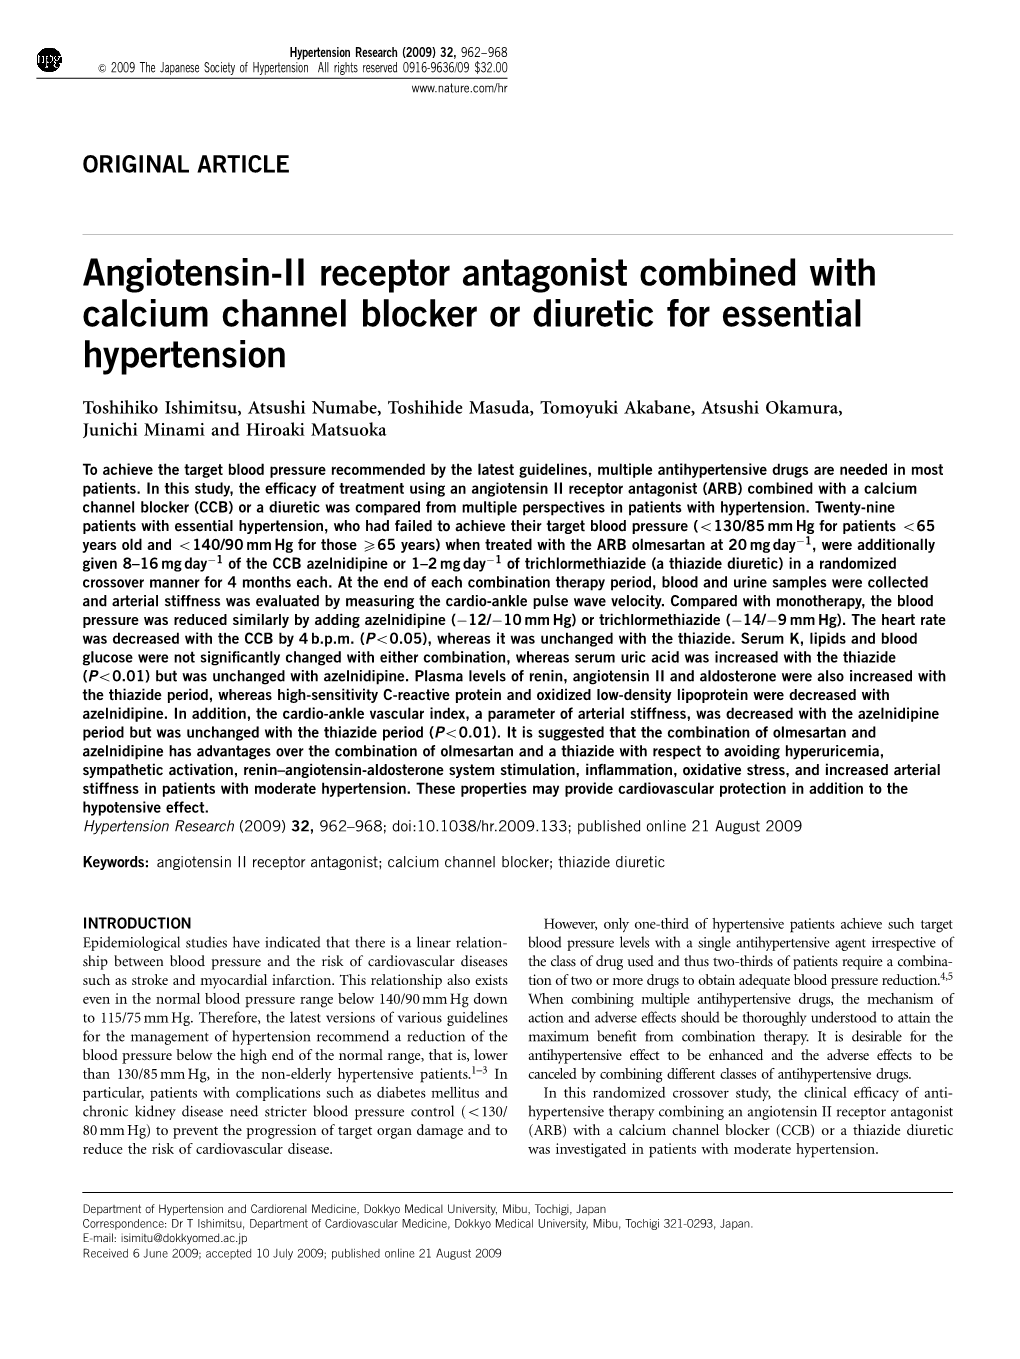 Angiotensin-II Receptor Antagonist Combined with Calcium Channel Blocker Or Diuretic for Essential Hypertension